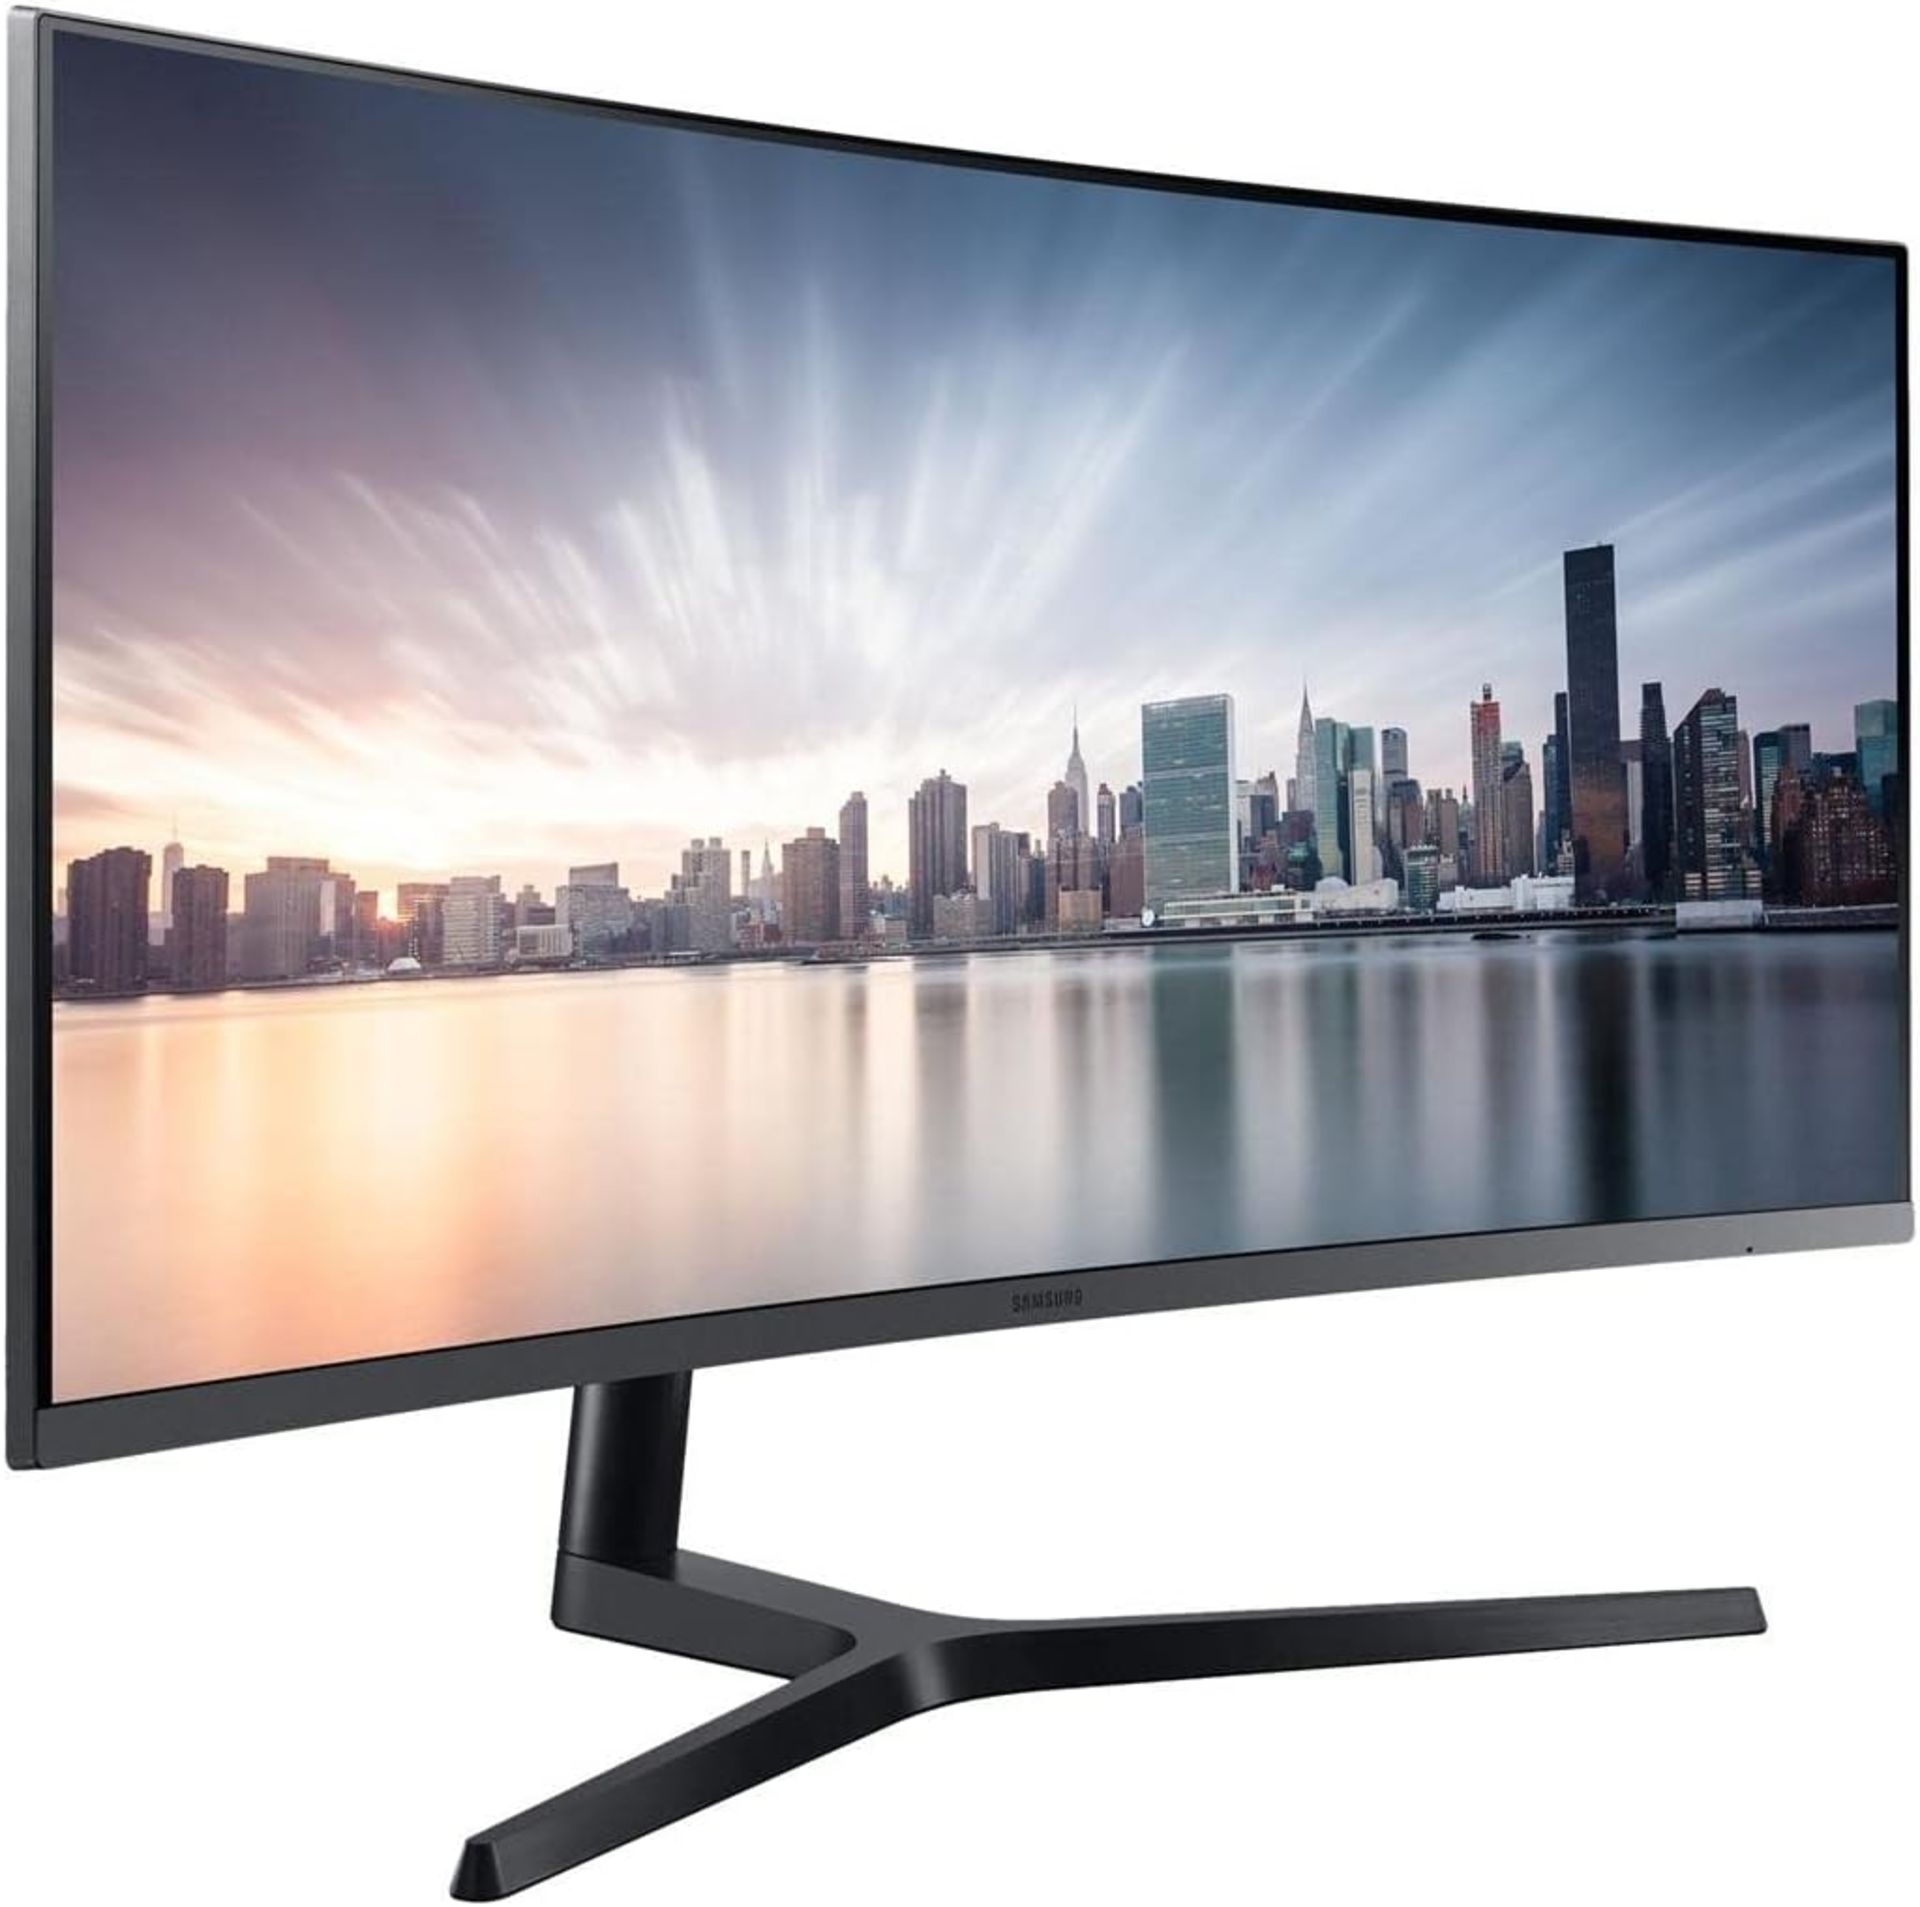 GRADE A SAMSUNG C34H890WGR - CH89 Series - LED 34 Inch Curved Monitor. RRP £499. (PCK5). The CH89